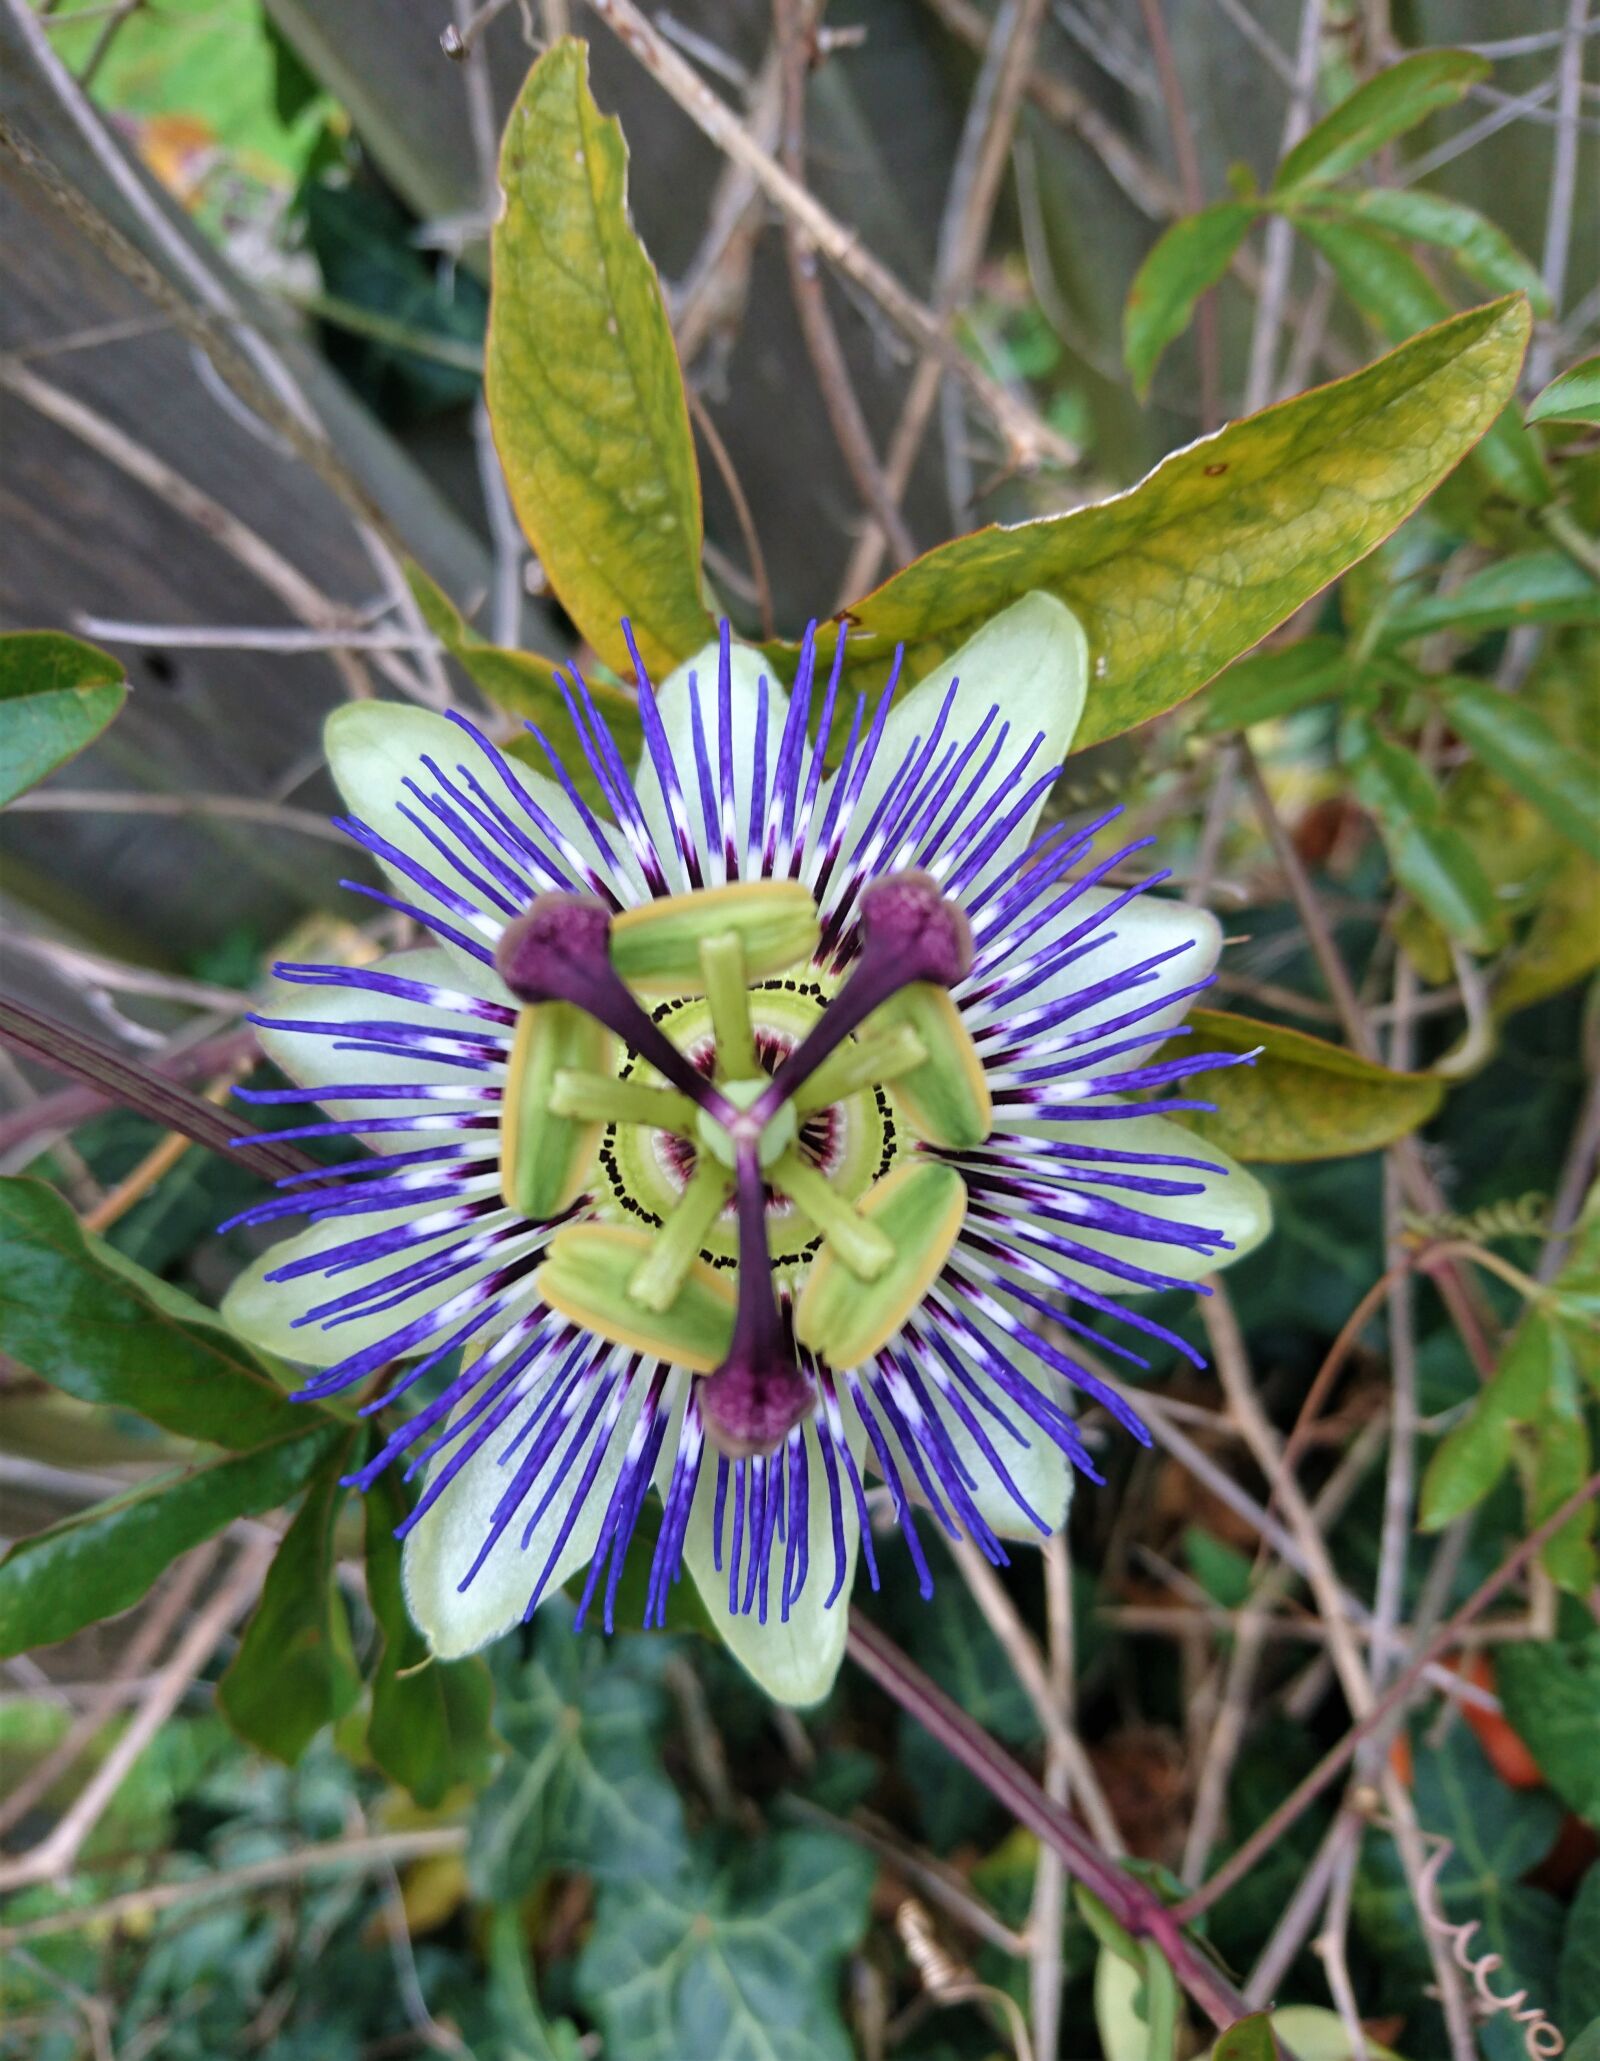 Sony Xperia Z5 Compact sample photo. Passion fruit, passion flower photography